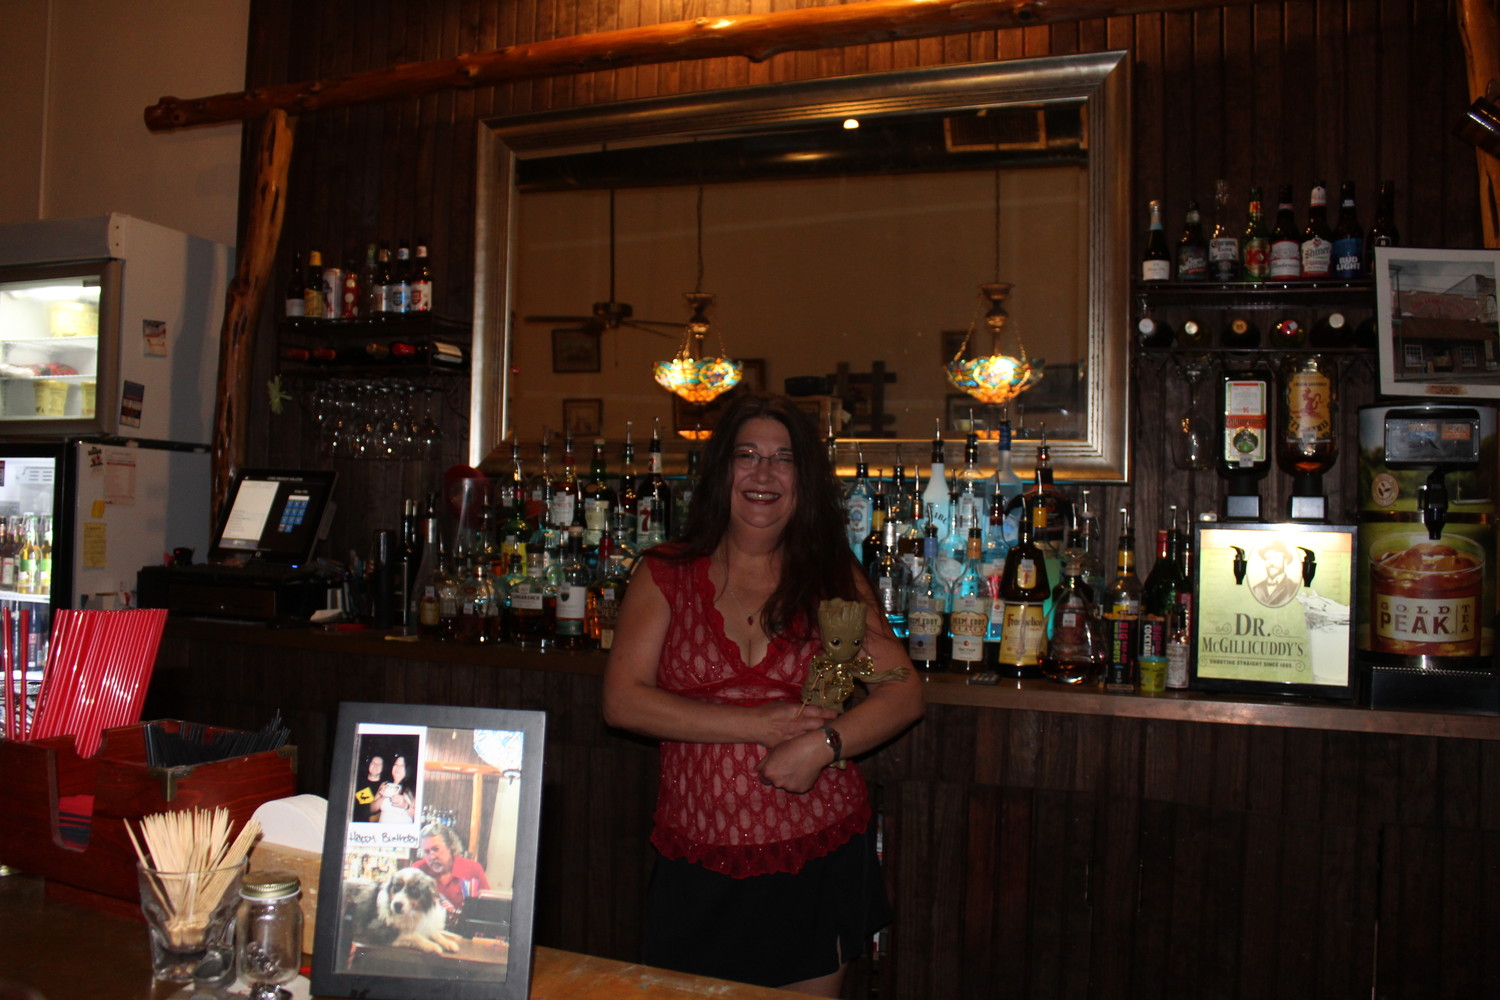 Karen Jacobs is feeling Groot about the potential of Gonzales and her saloon, the Long Branch Saloon located on the north side of Heroes Square.